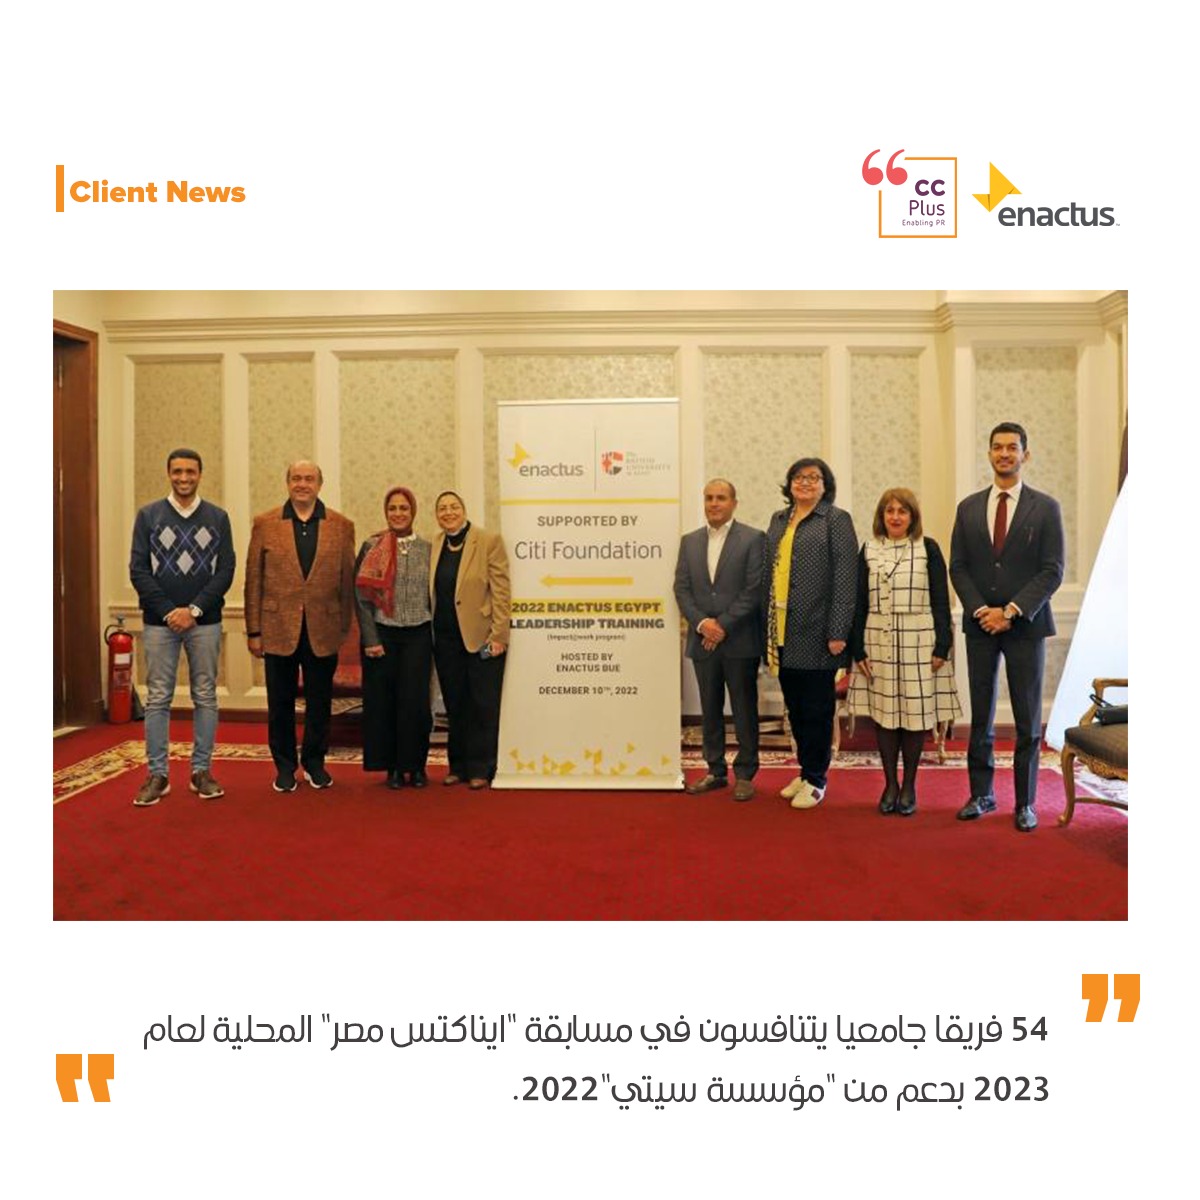 Launching the second annual edition of the social entrepreneurship program “Impact@Work” With the sponsorship of the “Citi Foundation,” 54 university teams to compete in the “Enactus Egypt” competition in 2023